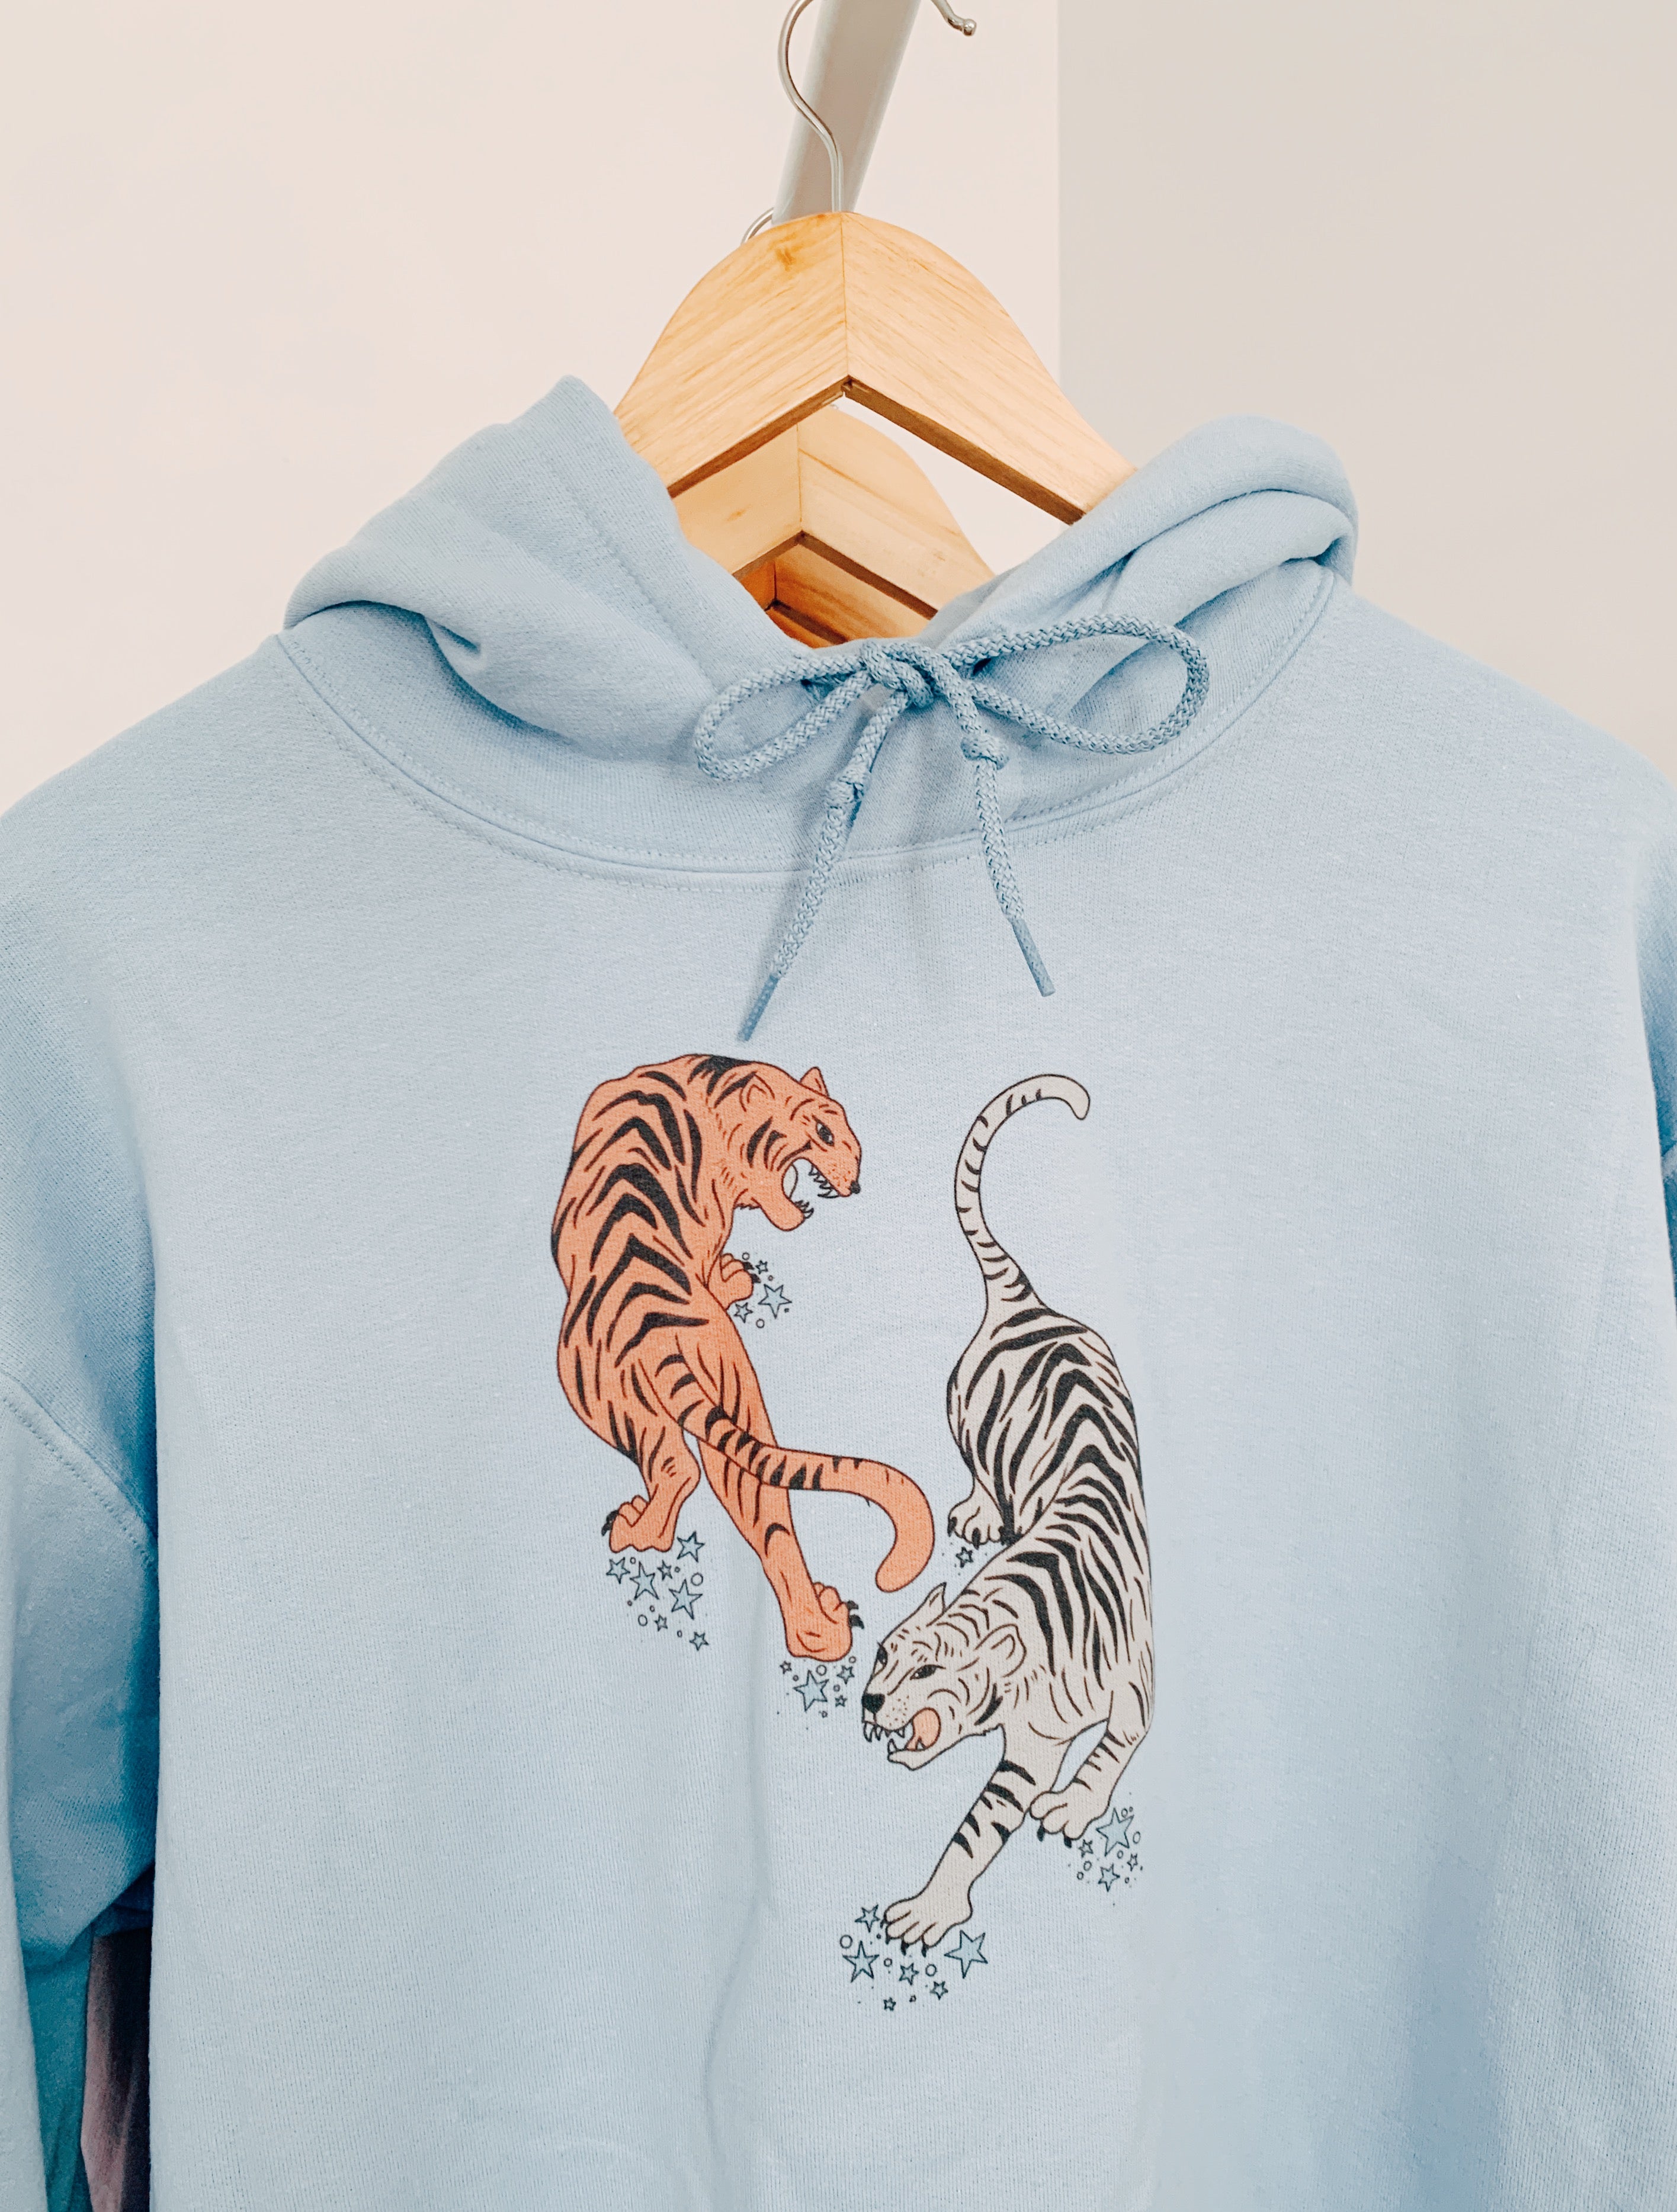 Ghosted Light Blue Hoodie